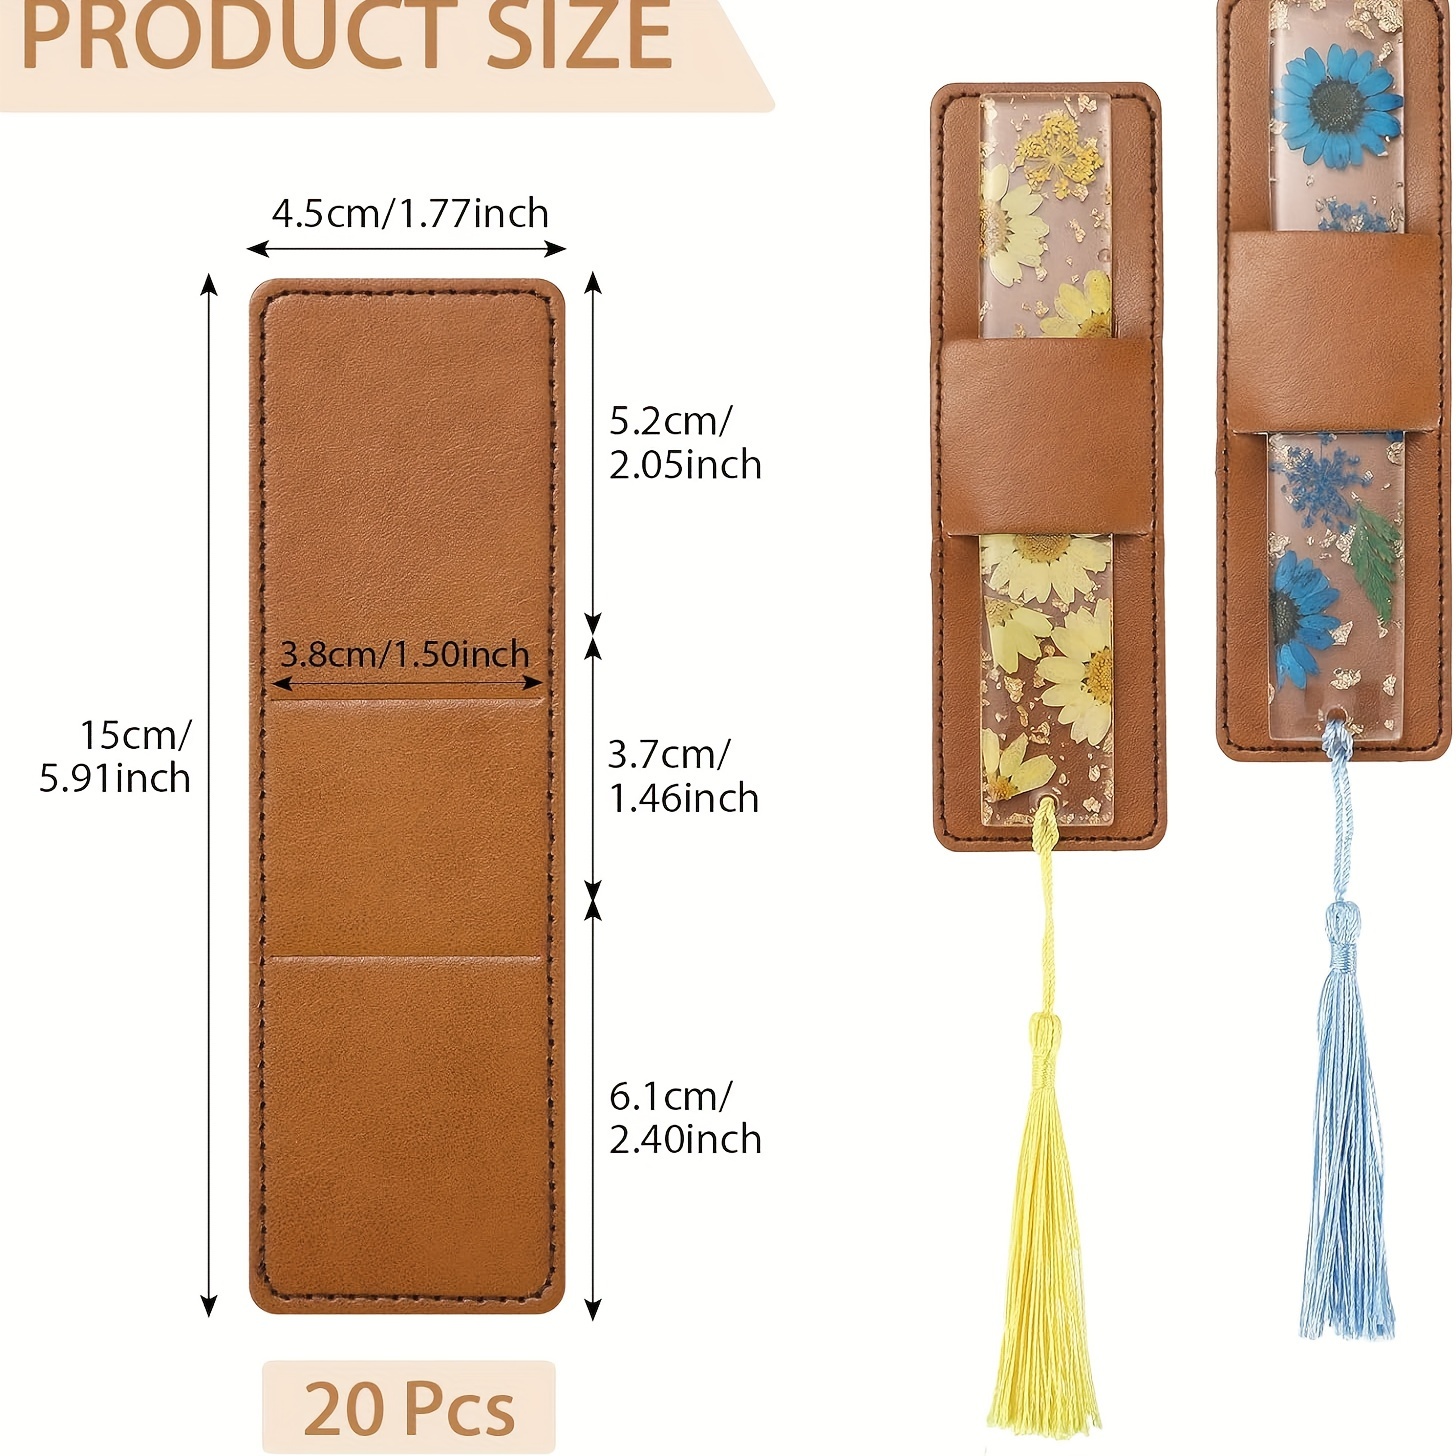 DIY Bookmark Holder Tutorial  Make the perfect packaging for your